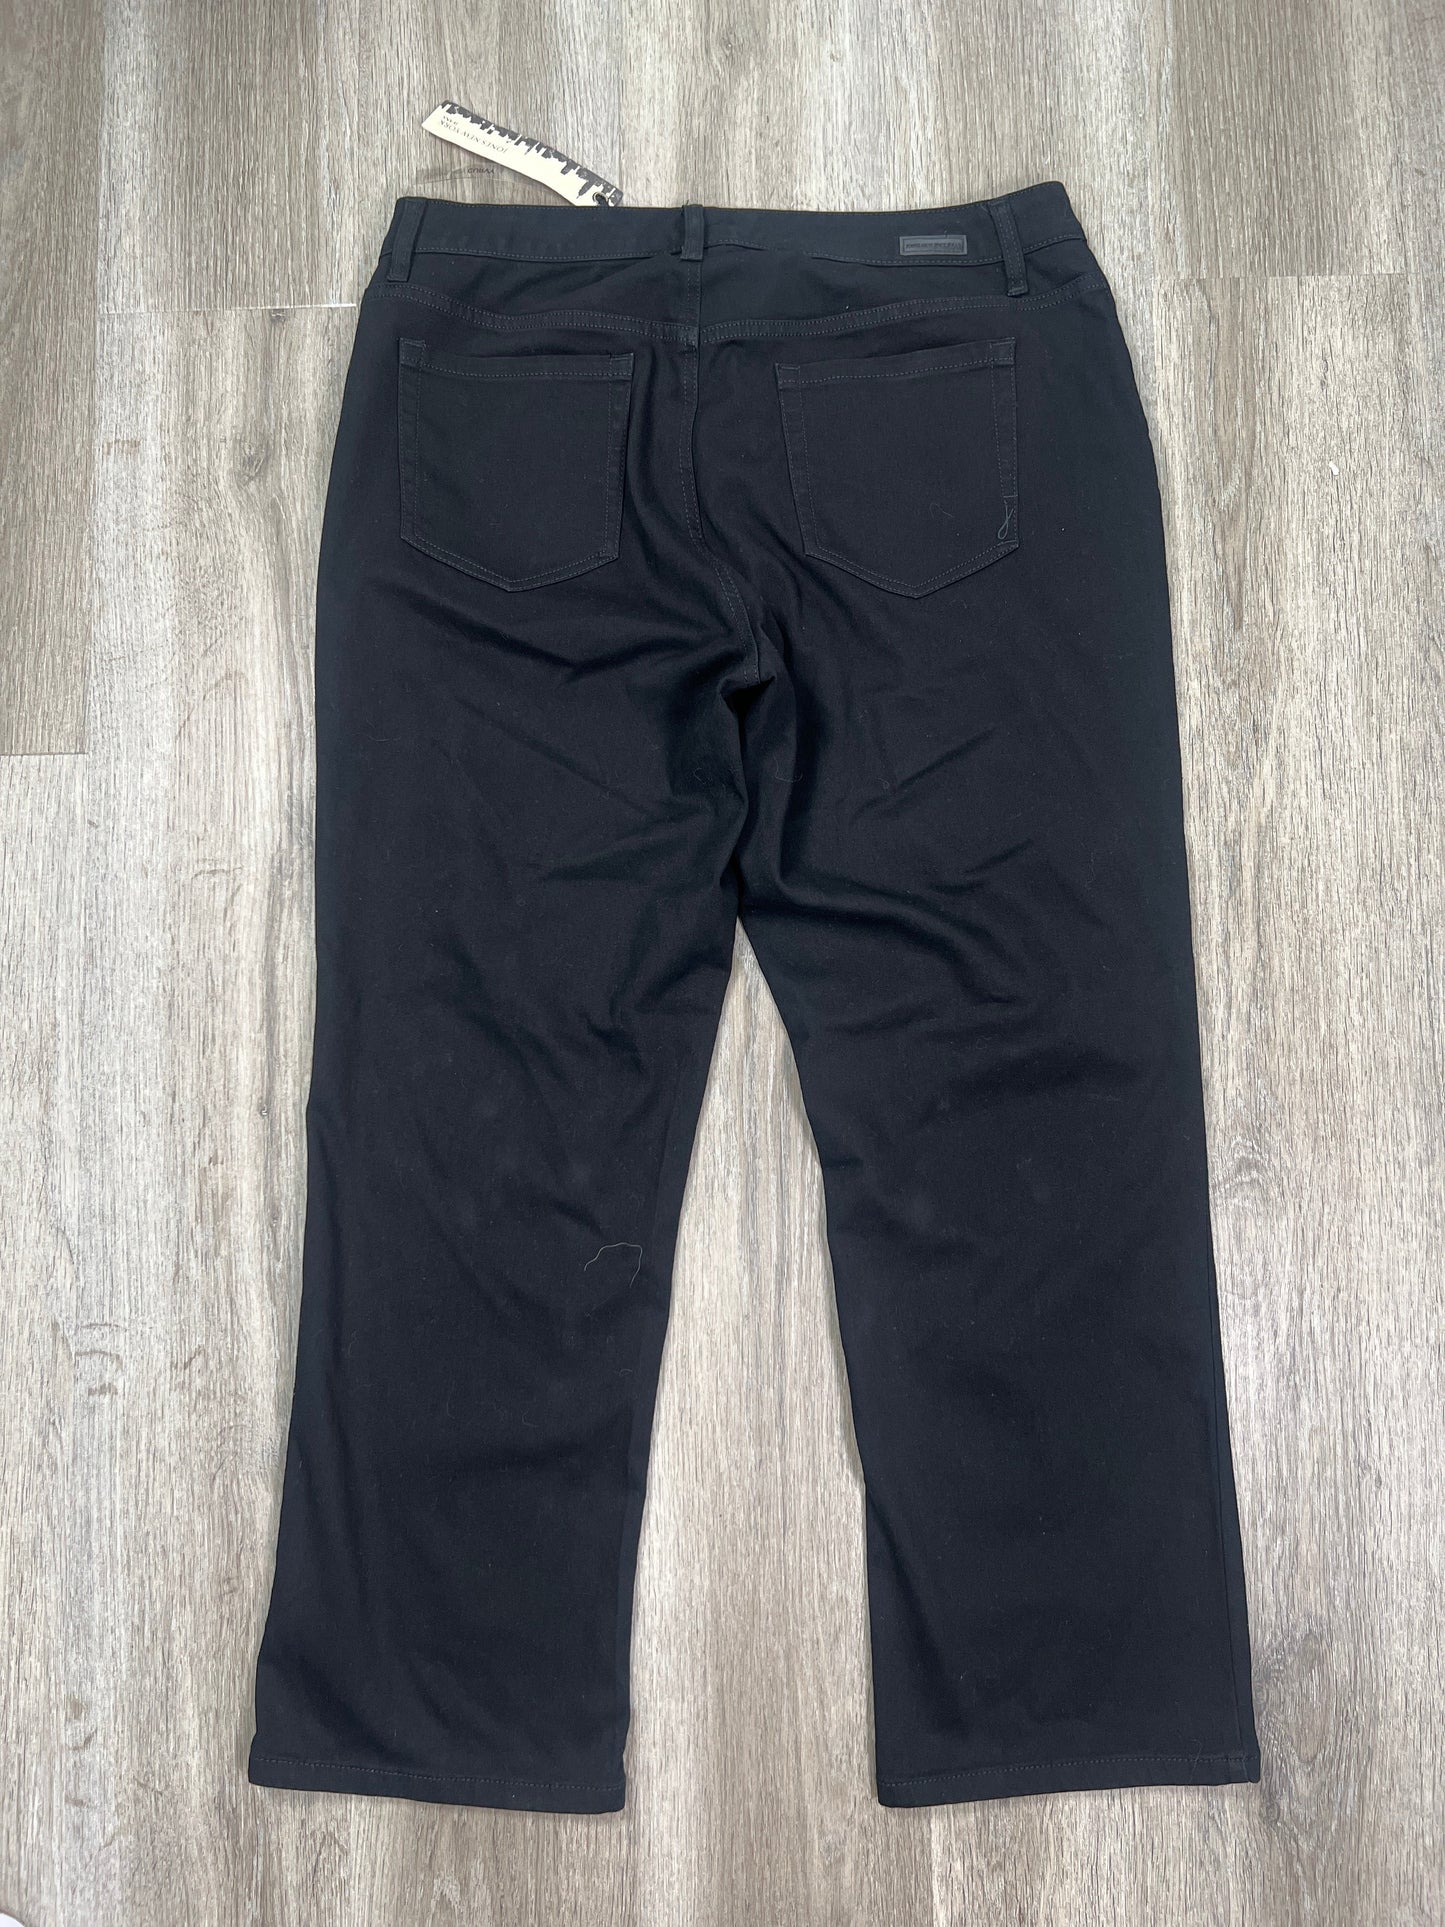 Jeans Boot Cut By Jones New York  Size: 18